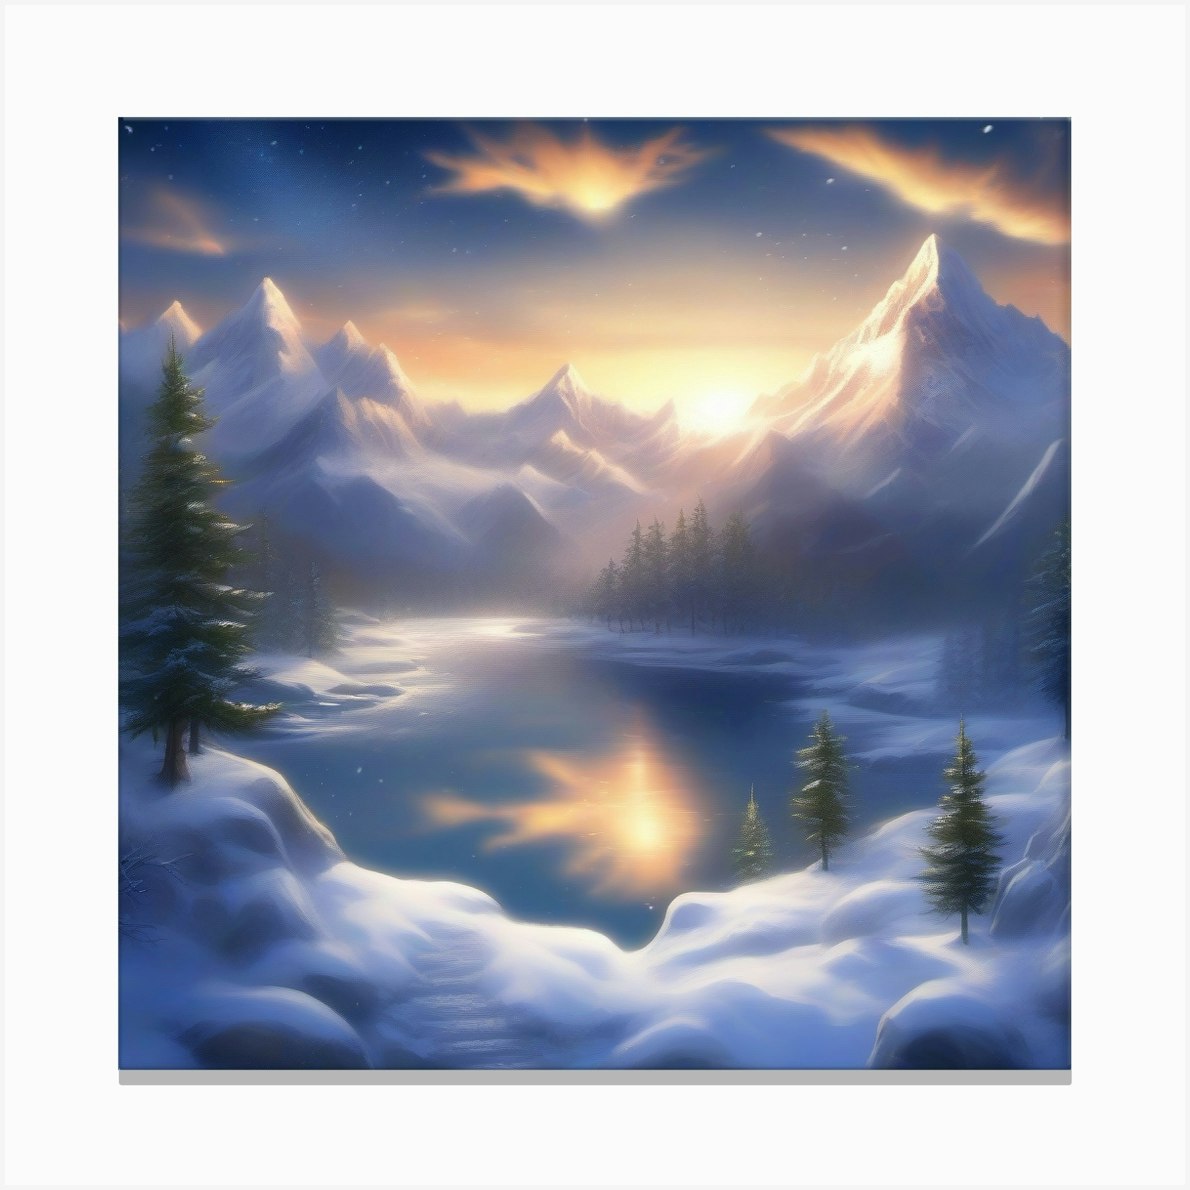 Winter Landscape, 1869 | Large Solid-Faced Canvas Wall Art Print | Great Big Canvas